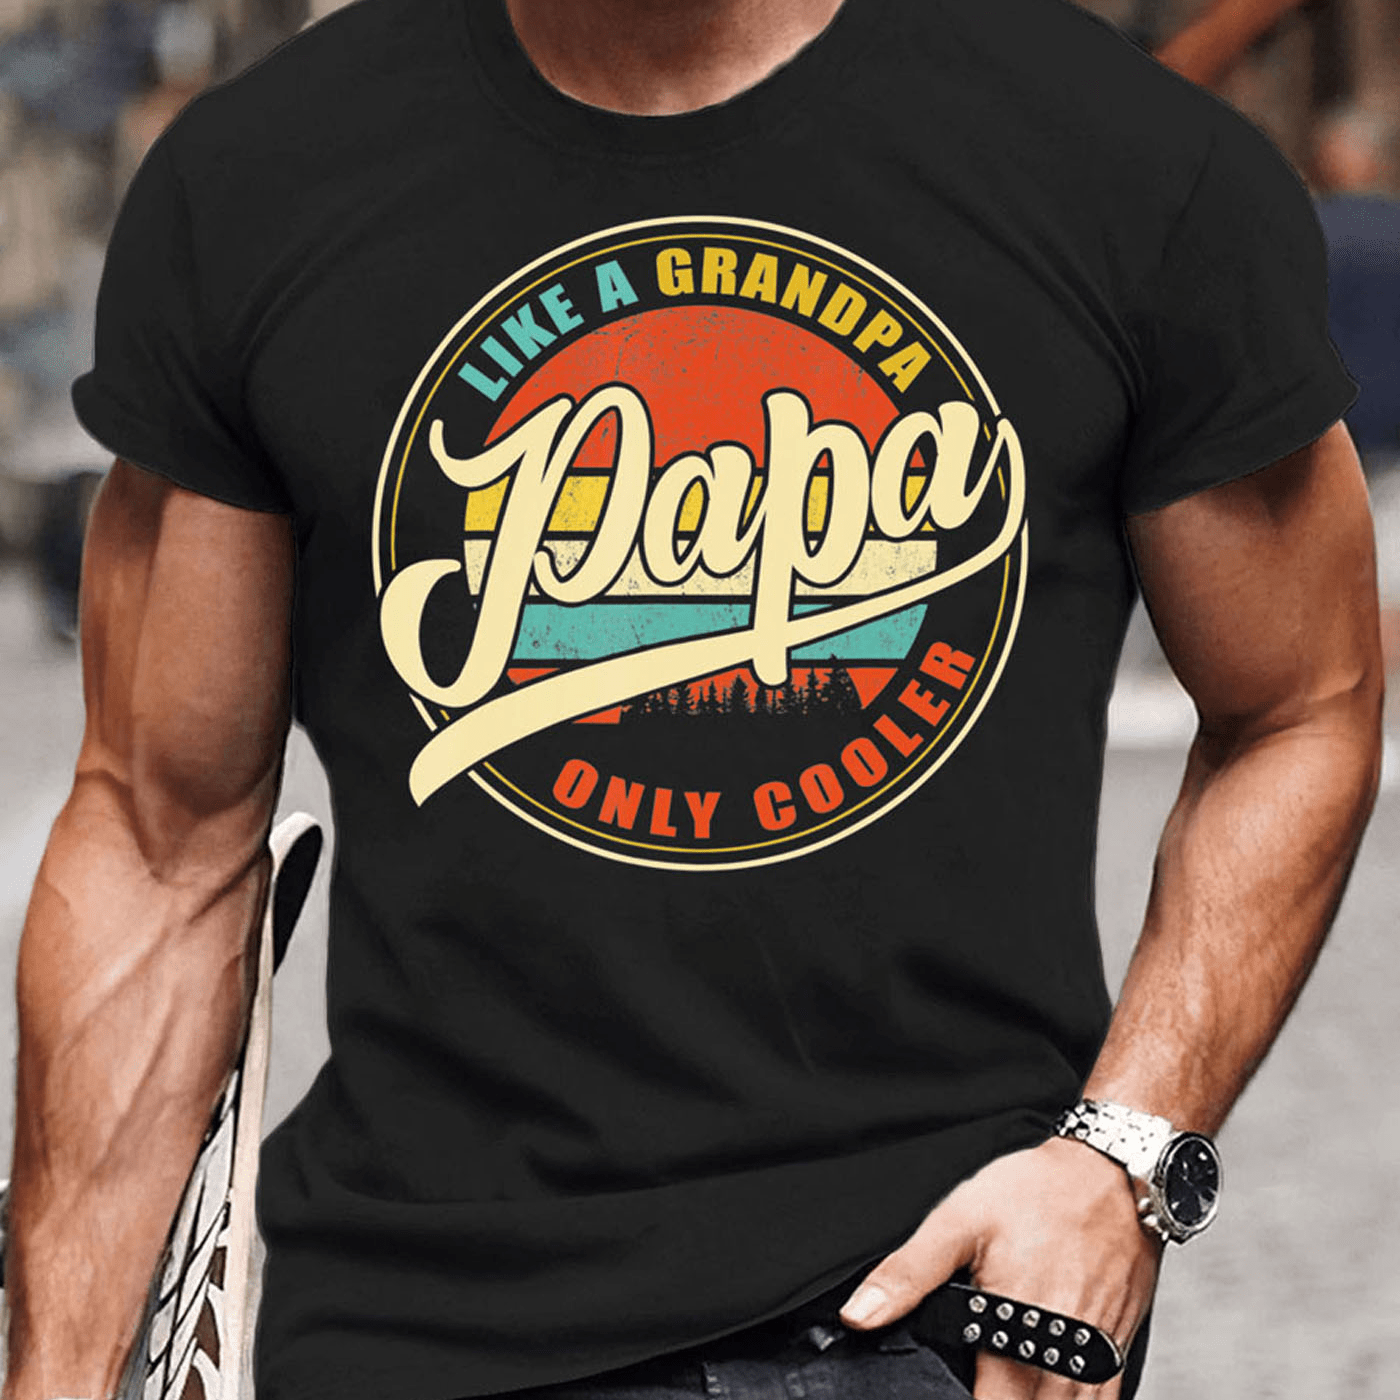 

Papa Themed Alphabet Print Crew Neck Short Sleeve T-shirt For Men, Casual Summer T-shirt For Daily Wear And Vacation Resorts